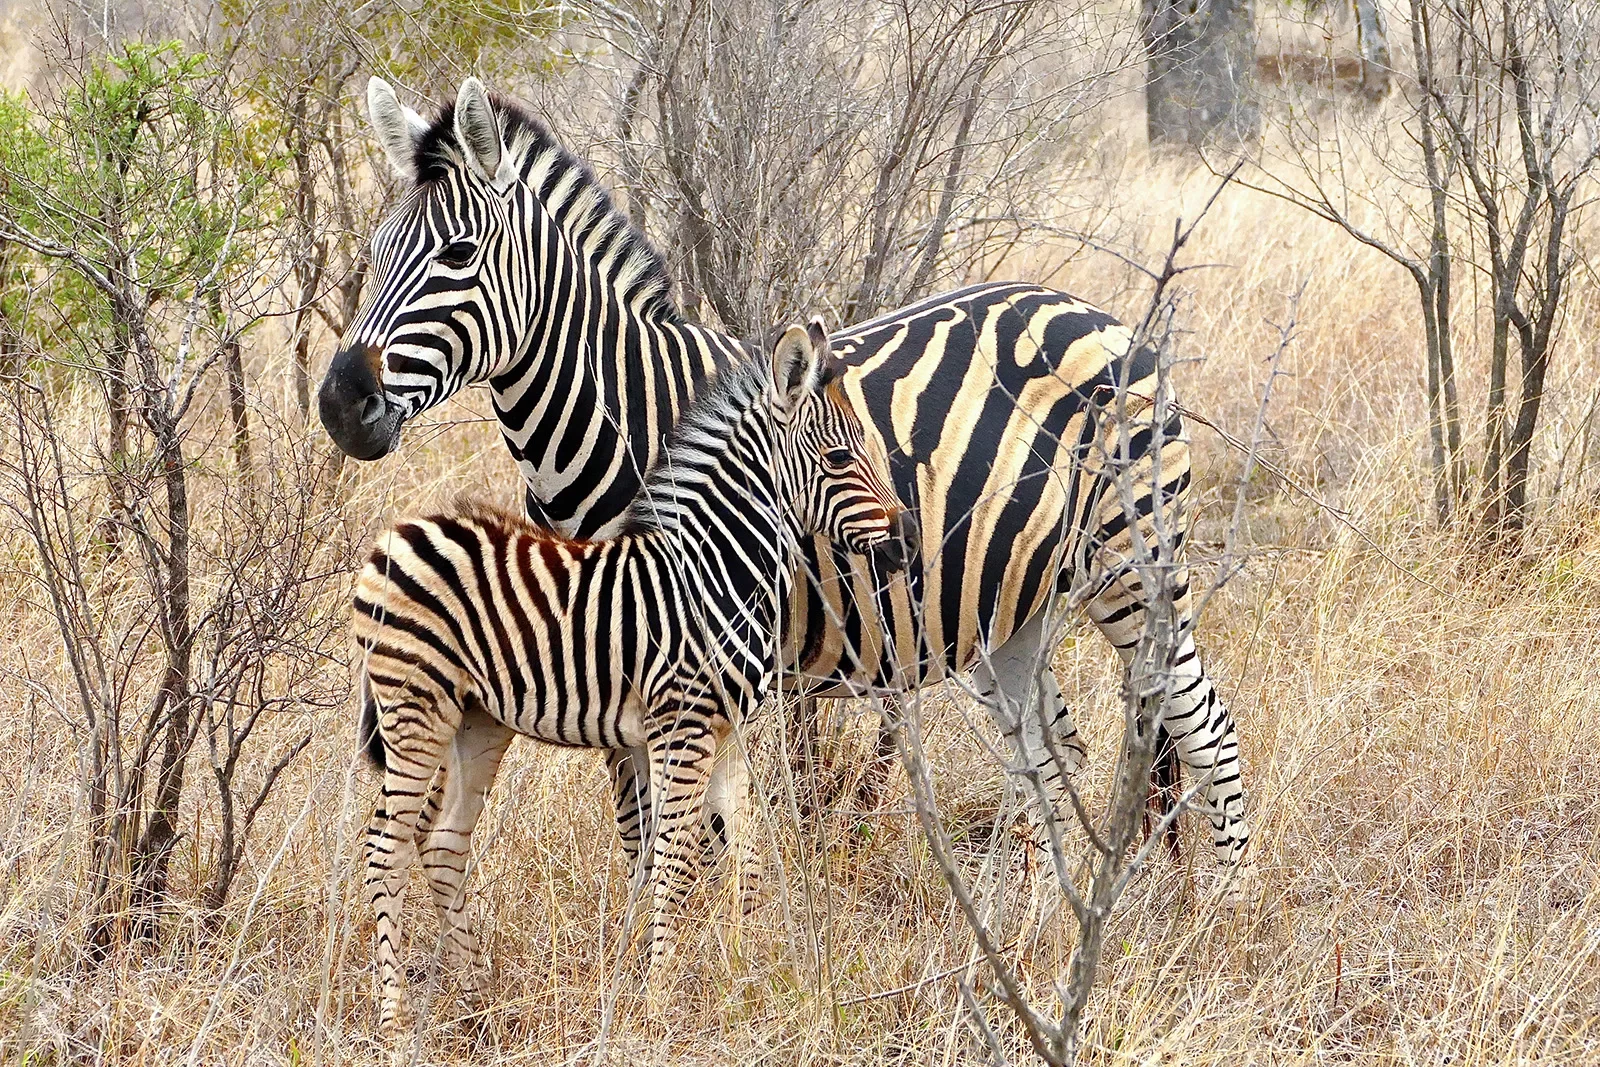 Adult and child zebras